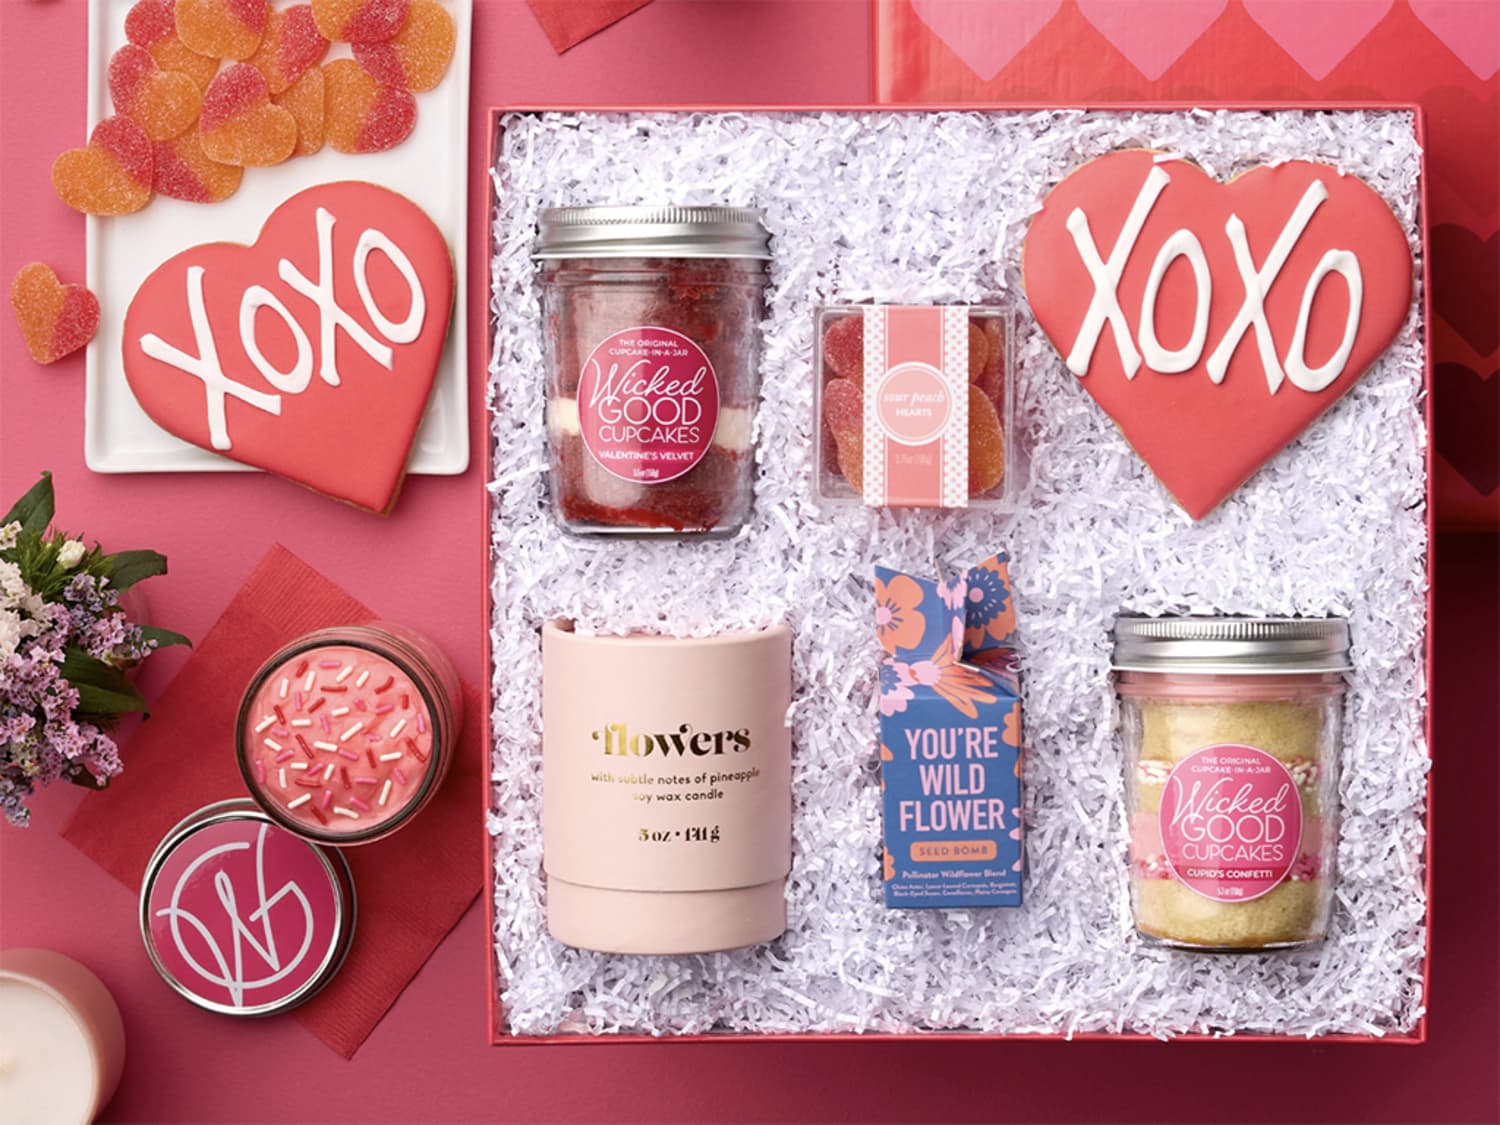 The Valentine's Day Sweet Treat Gift Box – Valentine's Day gift baskets –  NJ delivery - Blooms New Jersey, valentines day gift